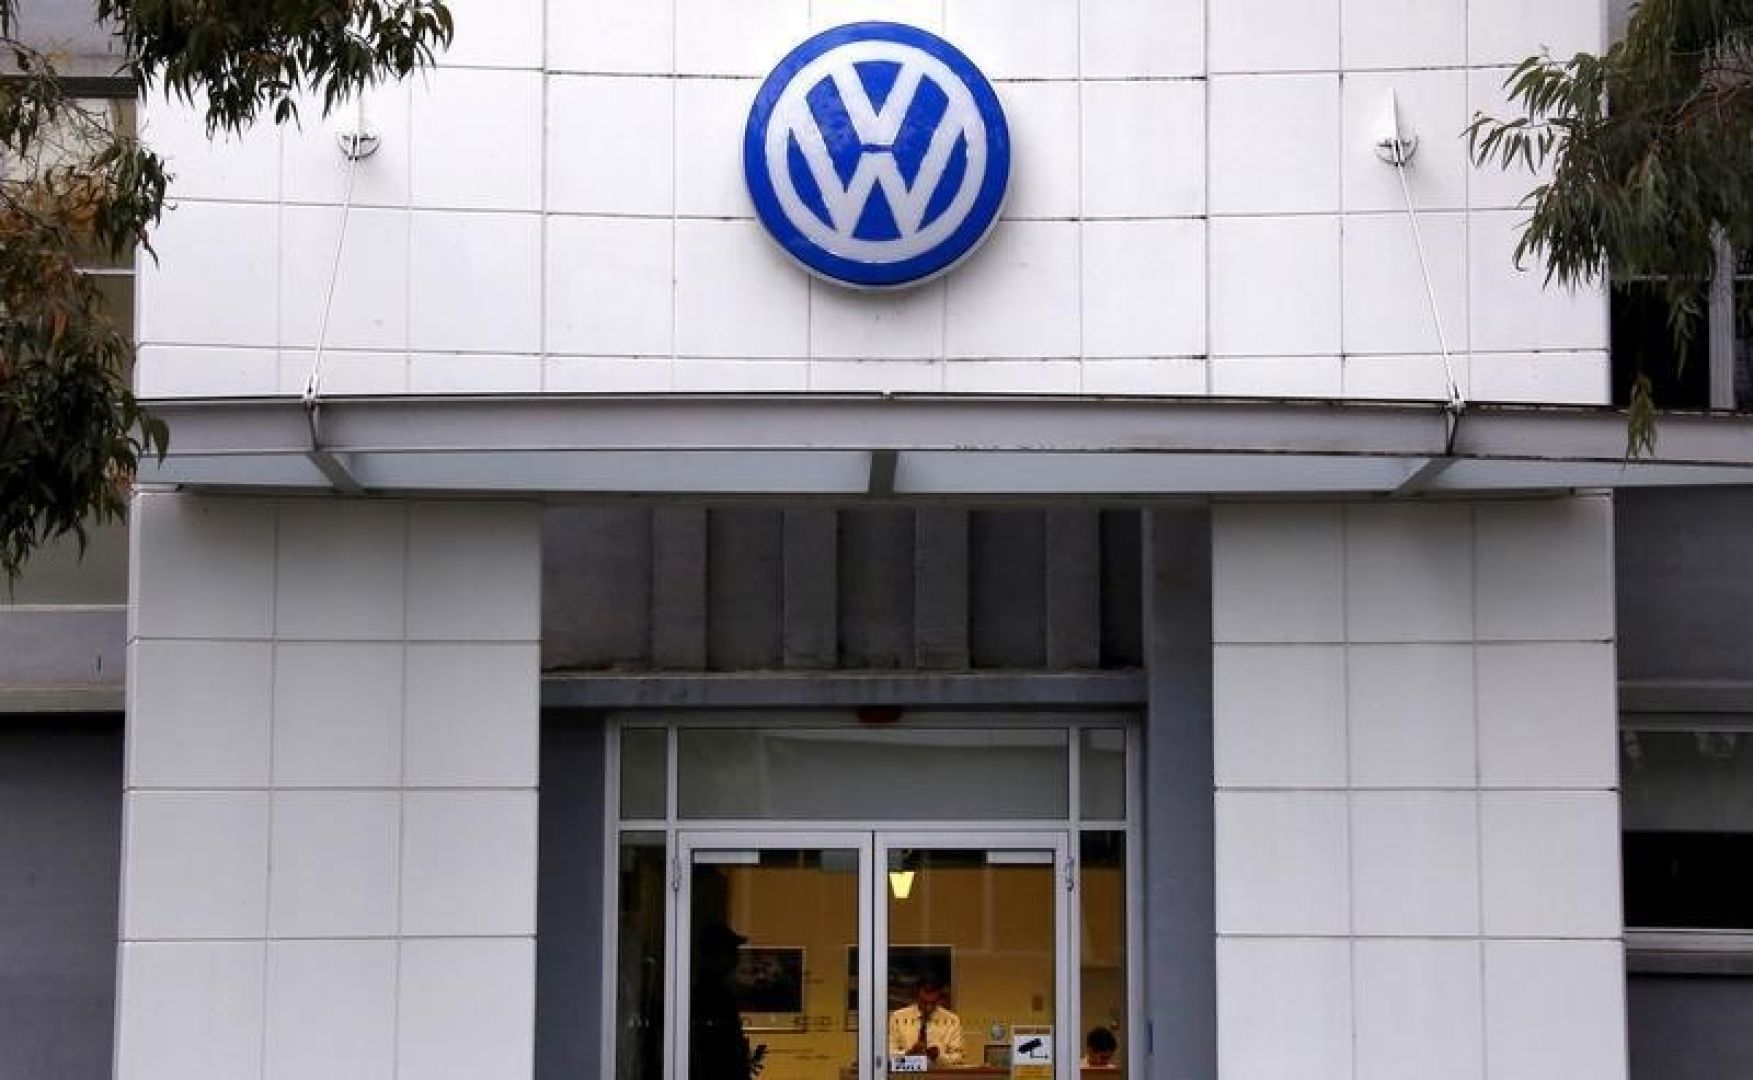 Bosch concealed Volkswagen use of 'defeat device' software: lawyers